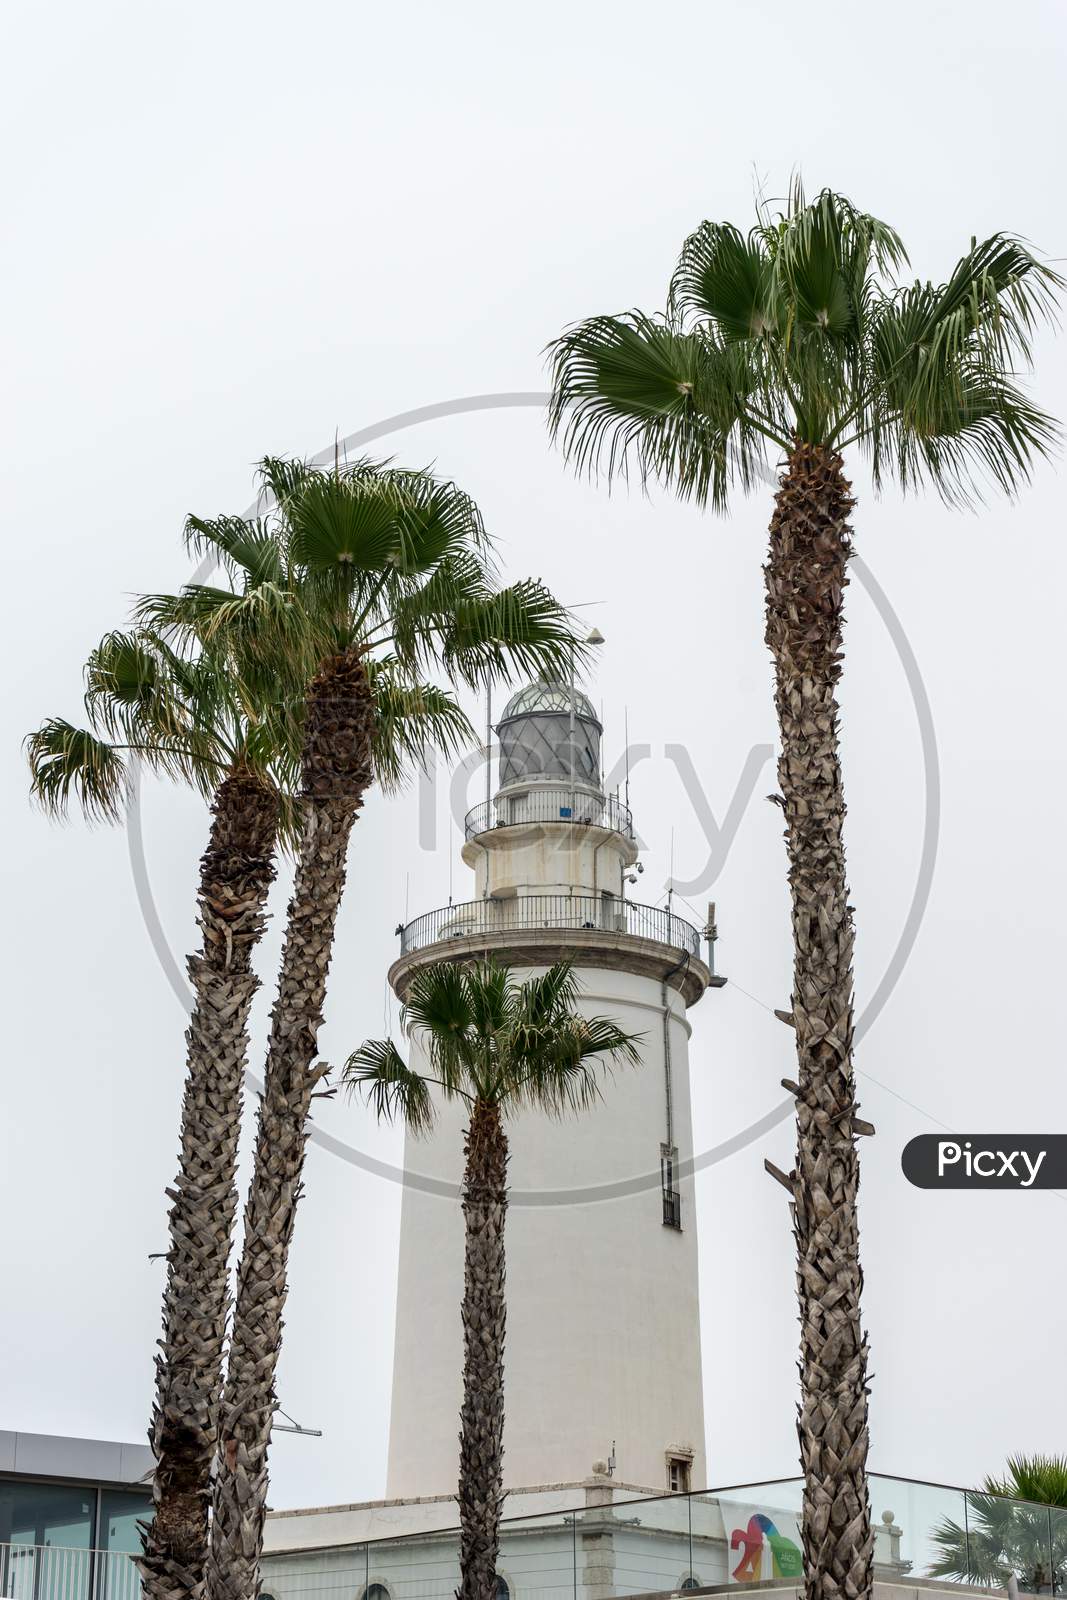 Tall Palm Trees With The Lighthouse In Malaga, Spain, Europe